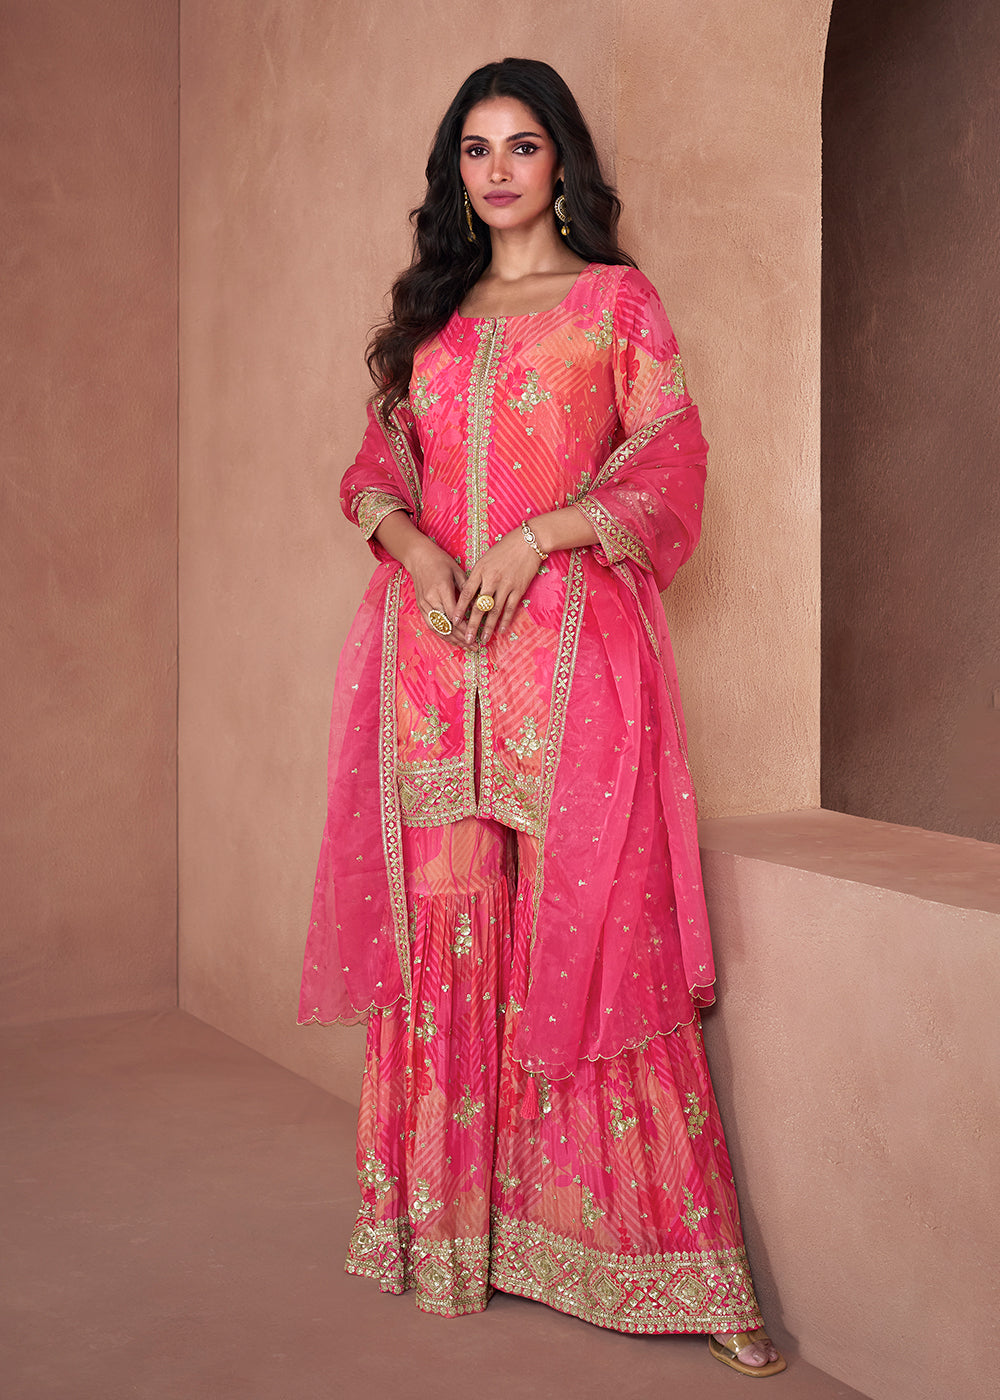 Shop Now Coral & Pink Real Georgette Printed Gharara Suit Online at Empress Clothing in USA, UK, Canada, Italy & Worldwide. 